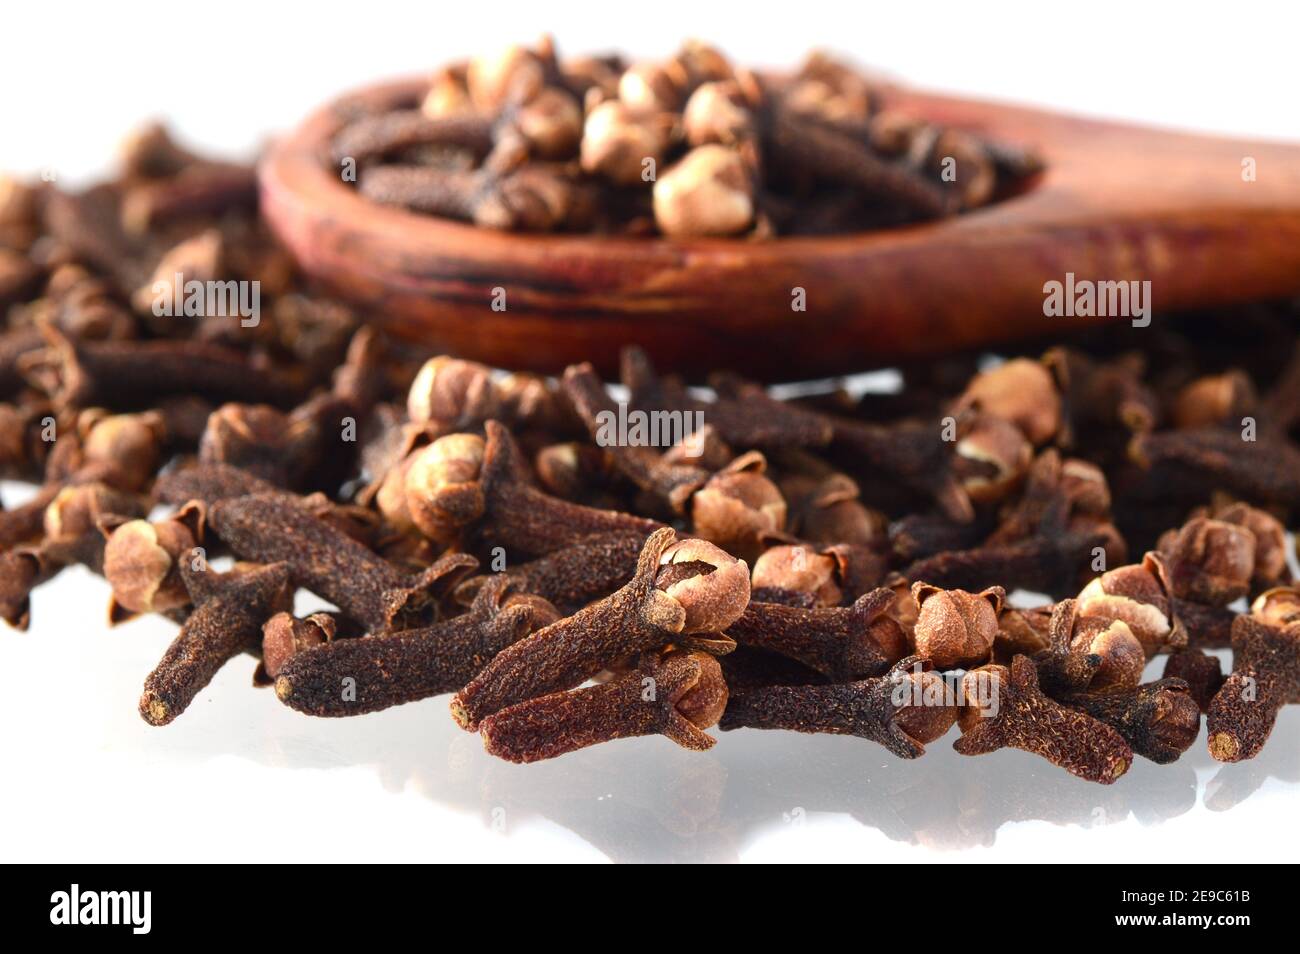 Cloves (spice) and wooden spoon close-up food background. Isolated on white background. Stock Photo